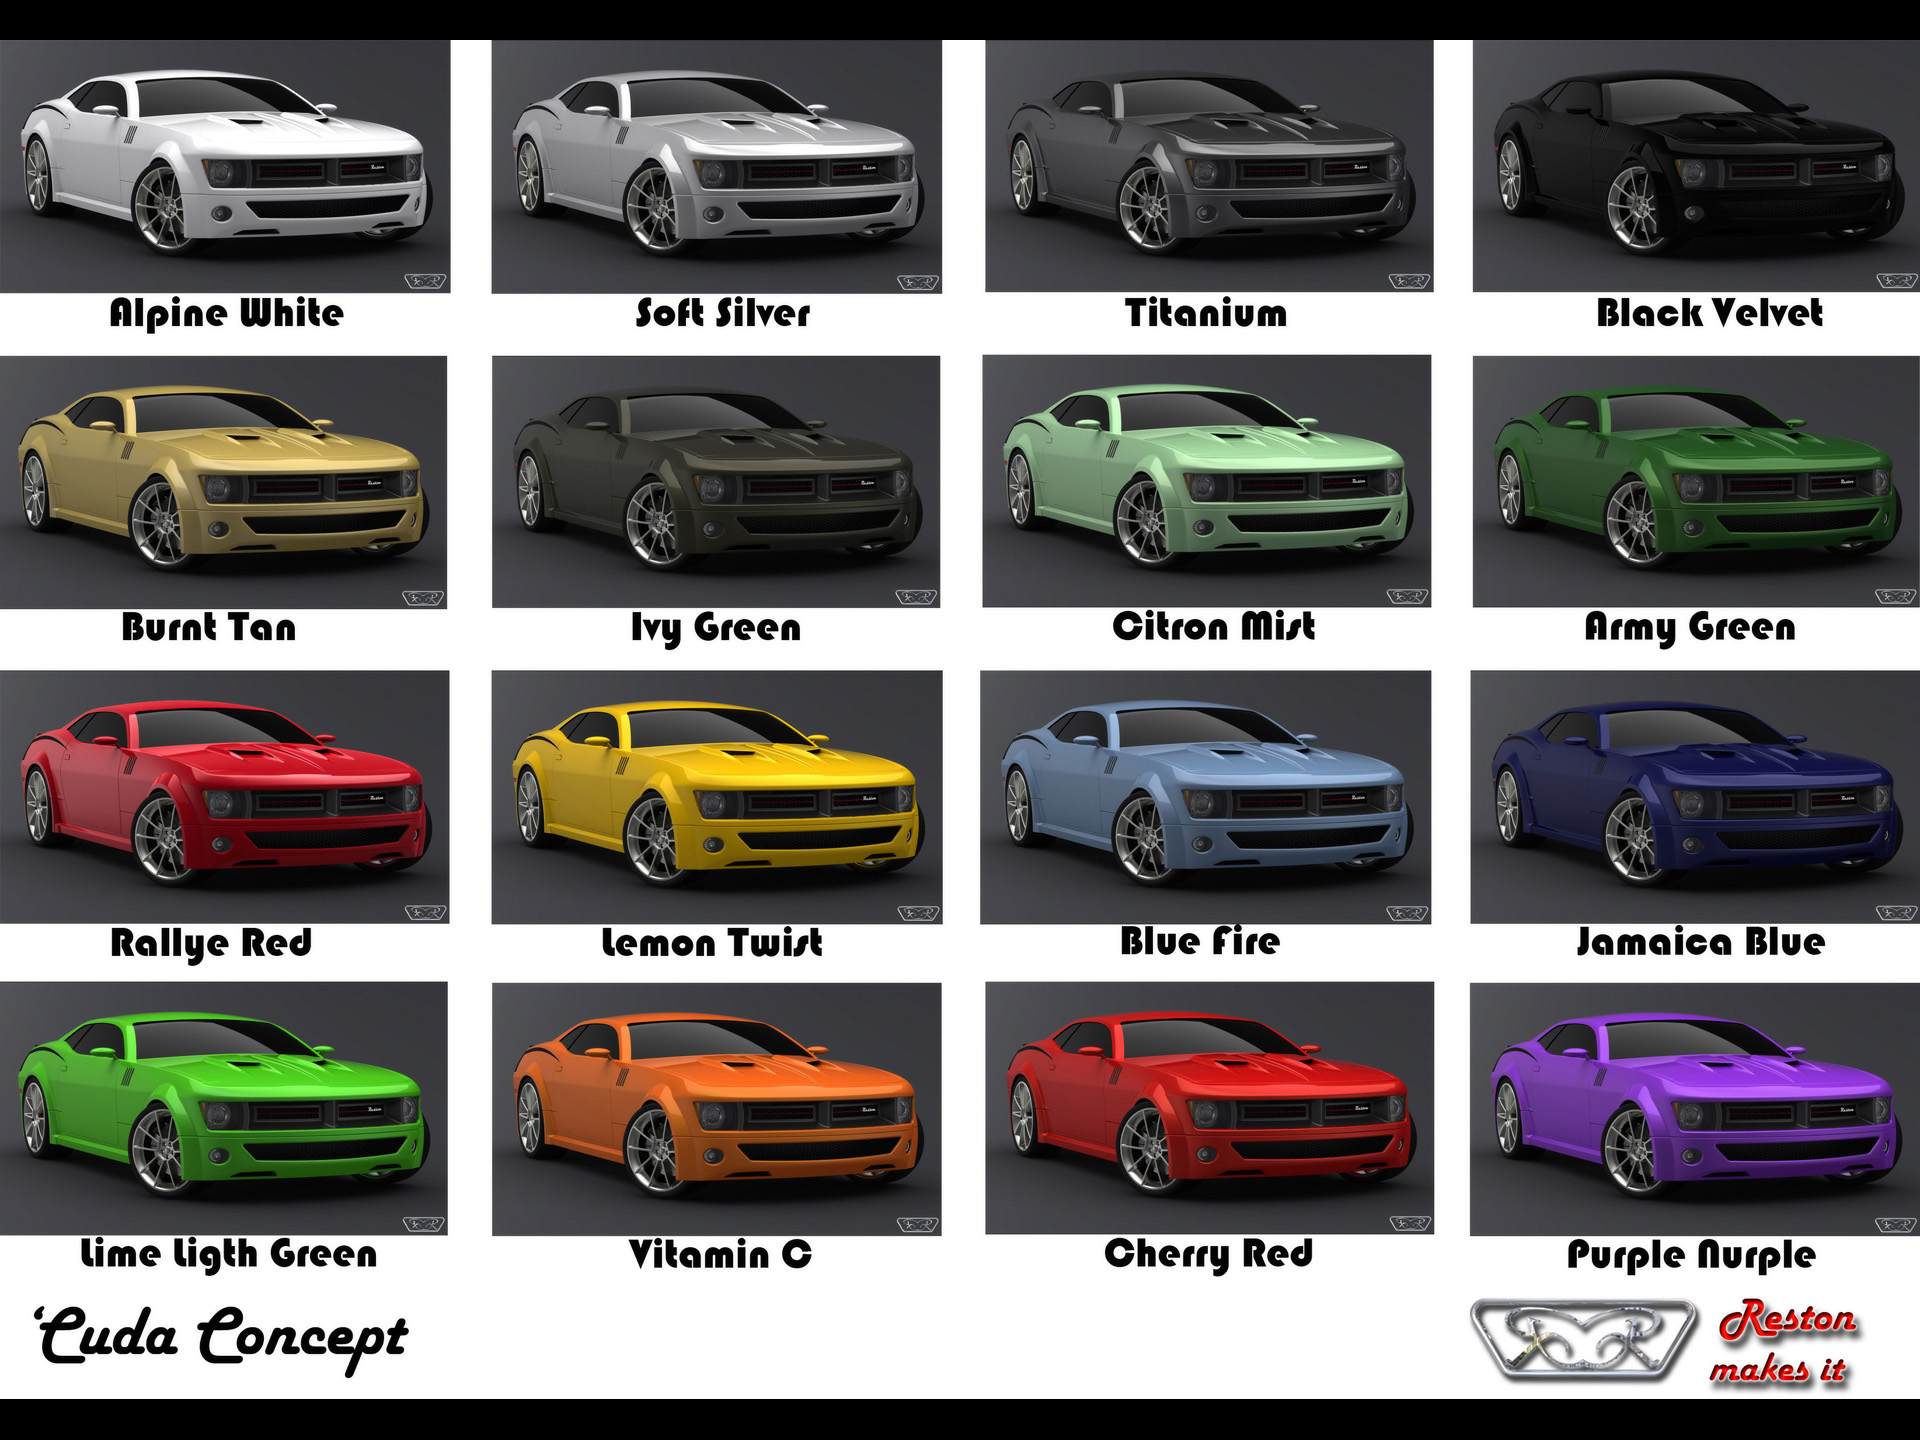 2008, Plymouth, Cuda, Concept, Mopar, Muscle, Tuning, Hot, Rod, Rods, Collage, Tile, Tiles, Poster, Posters Wallpaper